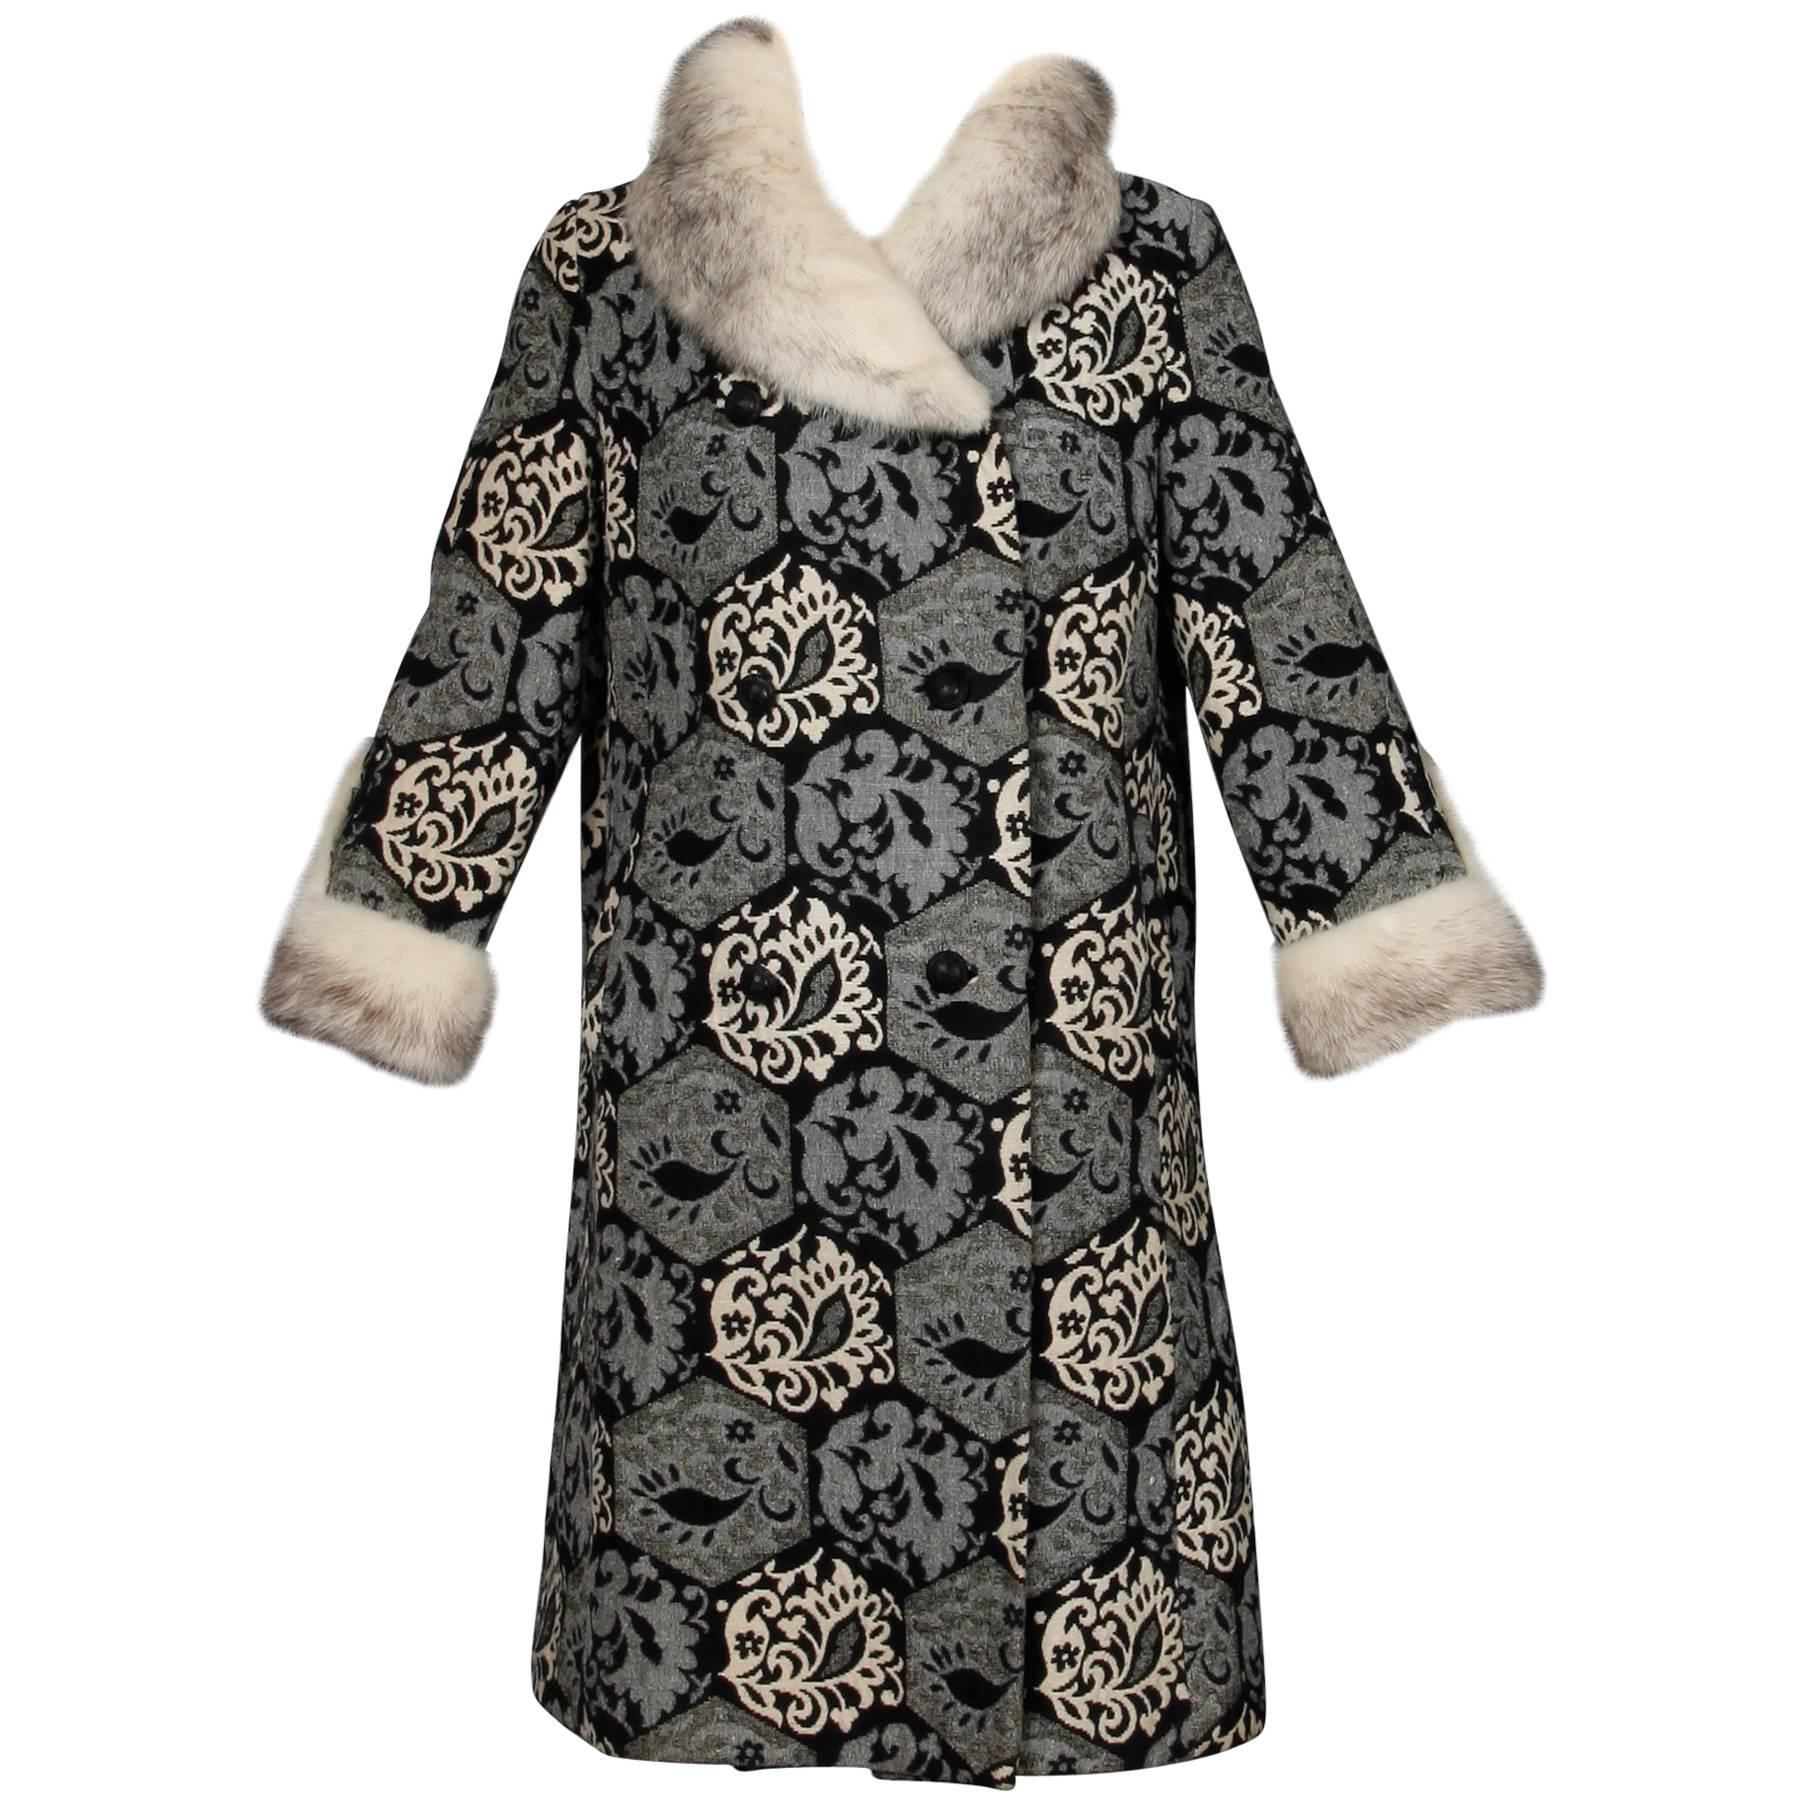 1960s Vintage Wool Tapestry Coat with Black, White Cross Mink Fur Collar + Cuffs